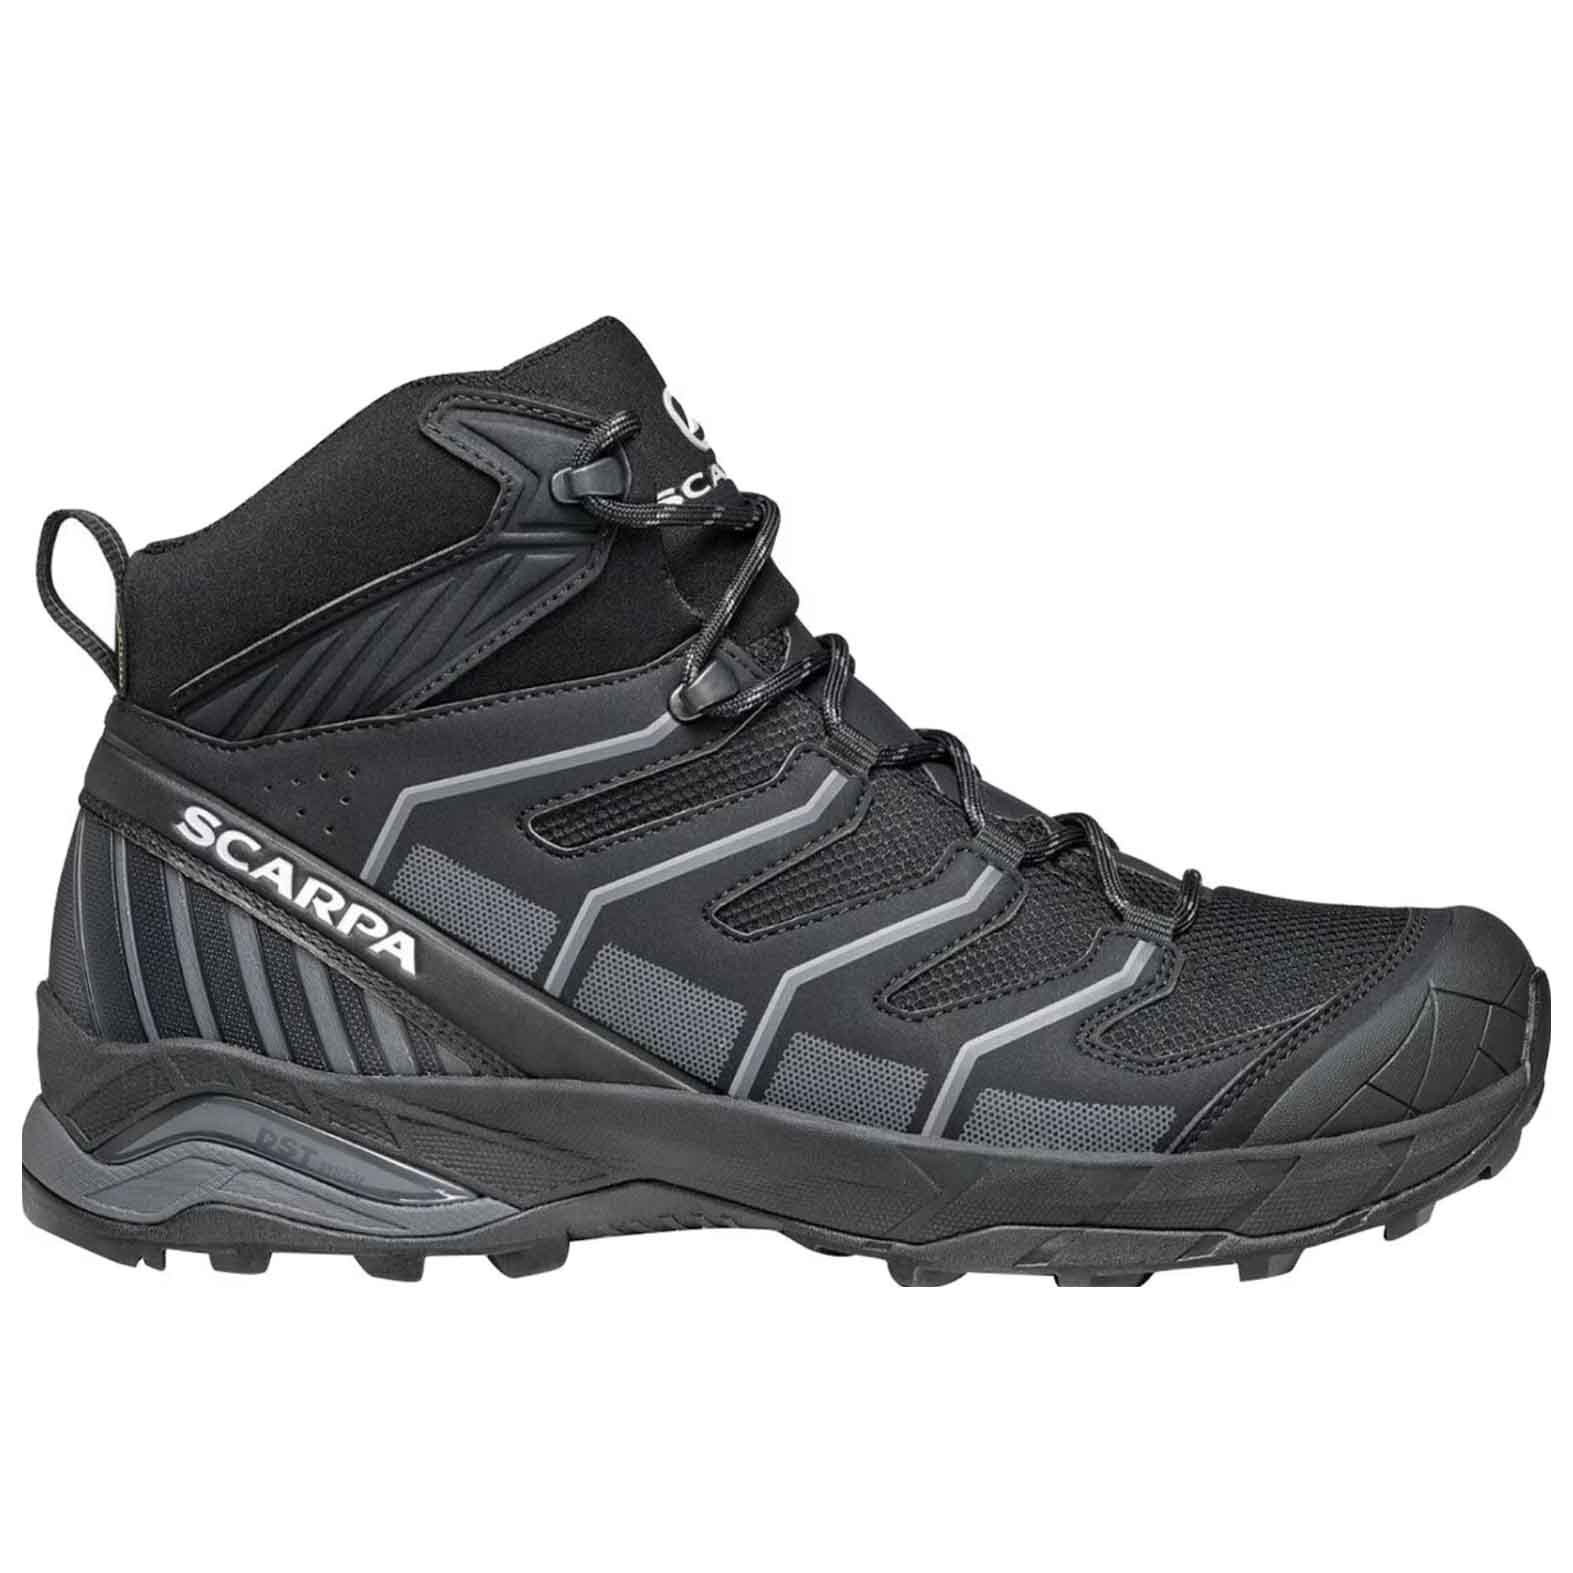 Maverick Mid GTX Hiking Boots in black and gray